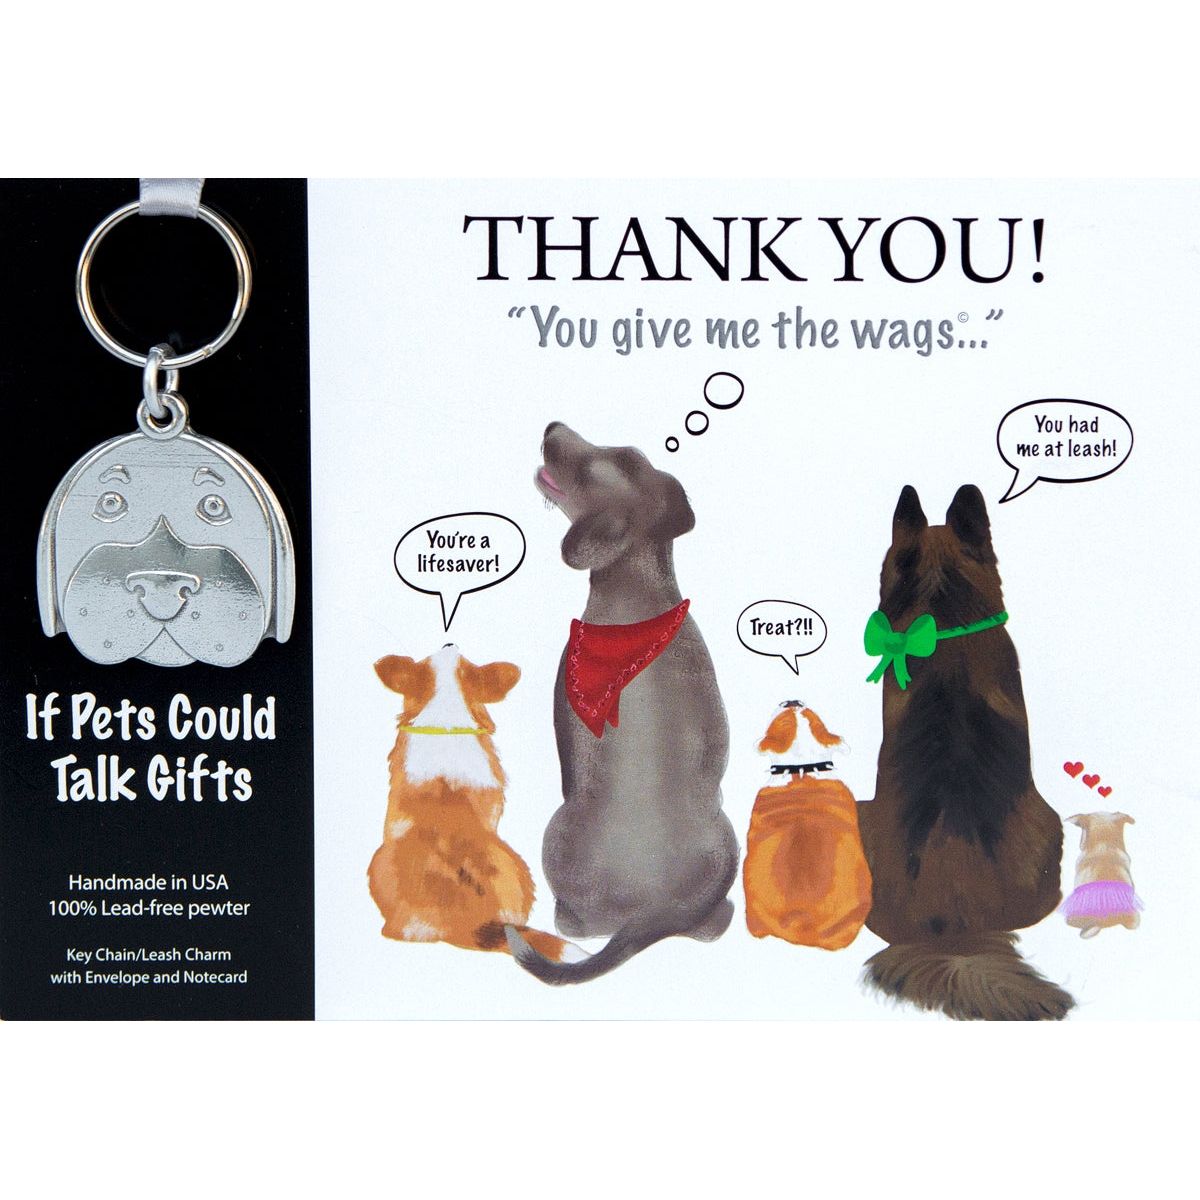 Pewter keychain in shape of a dog's face packaged with a "Thank You" card.